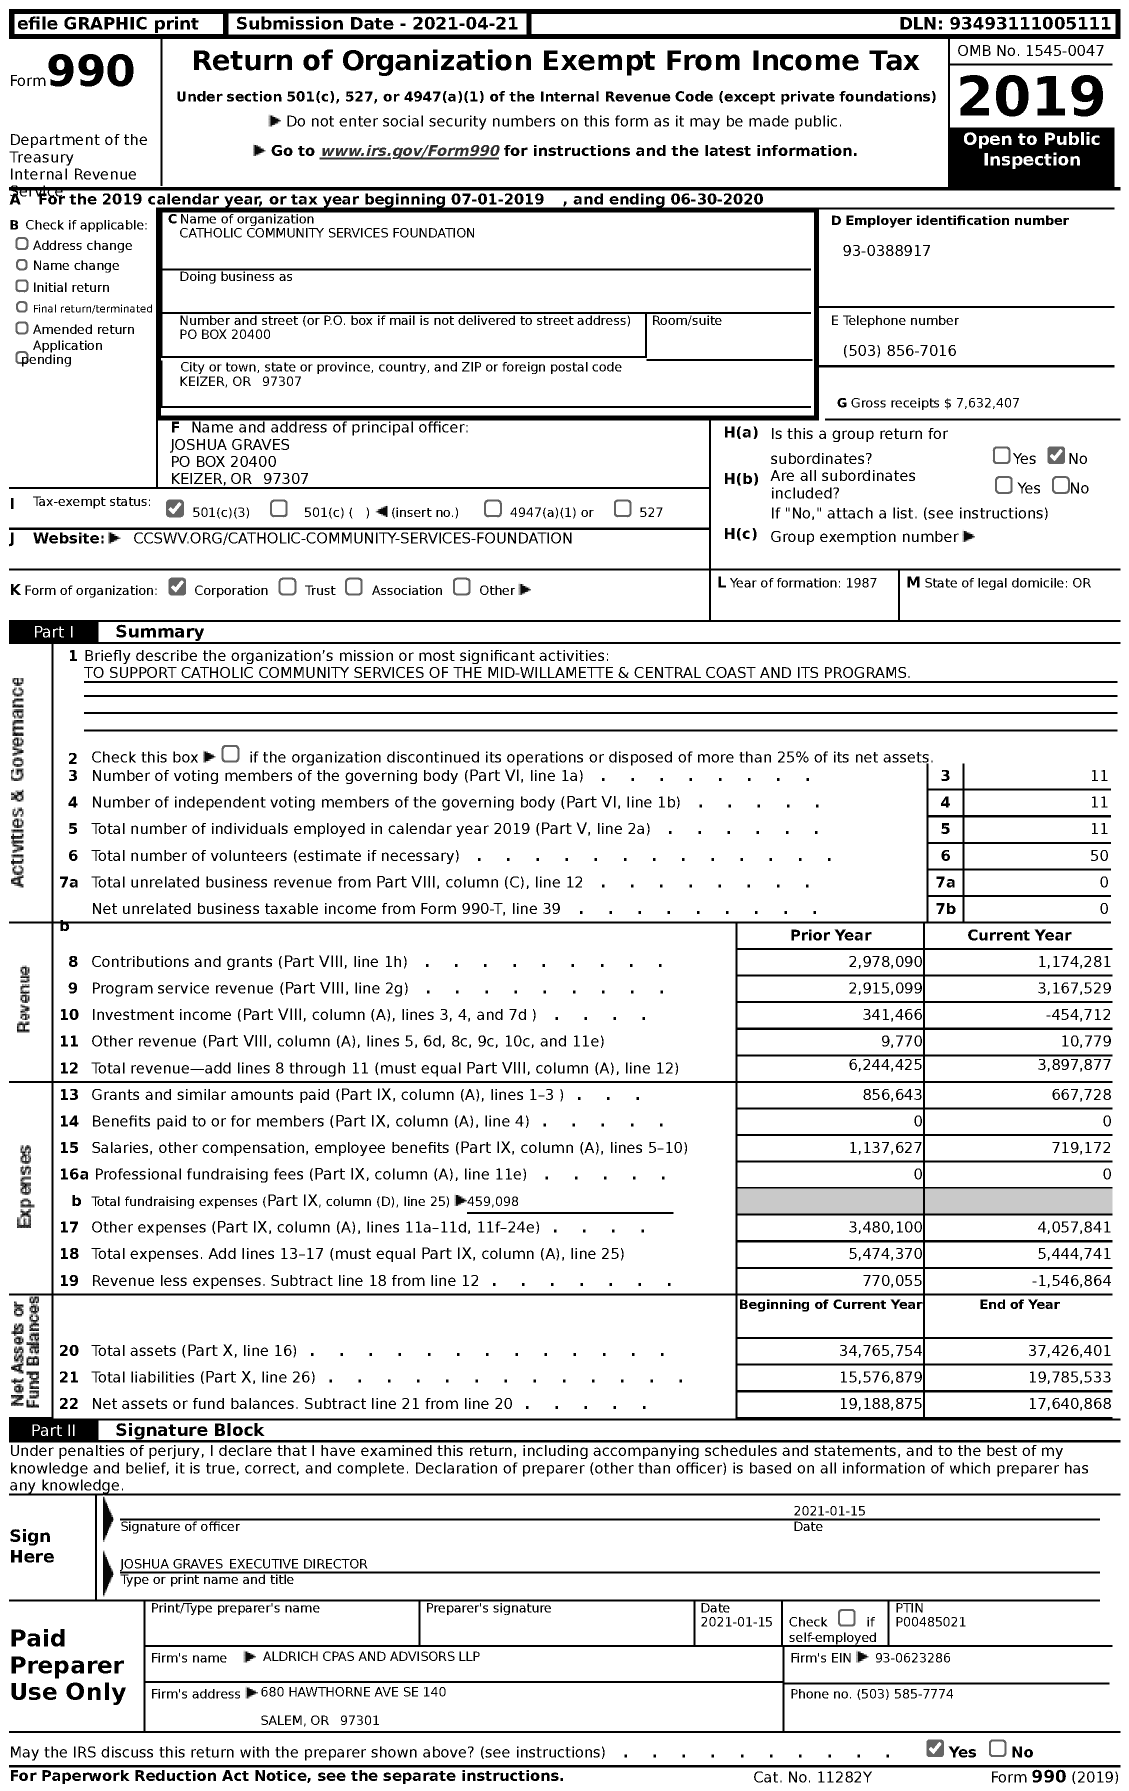 Image of first page of 2019 Form 990 for Catholic Community Services Foundation (CCS)